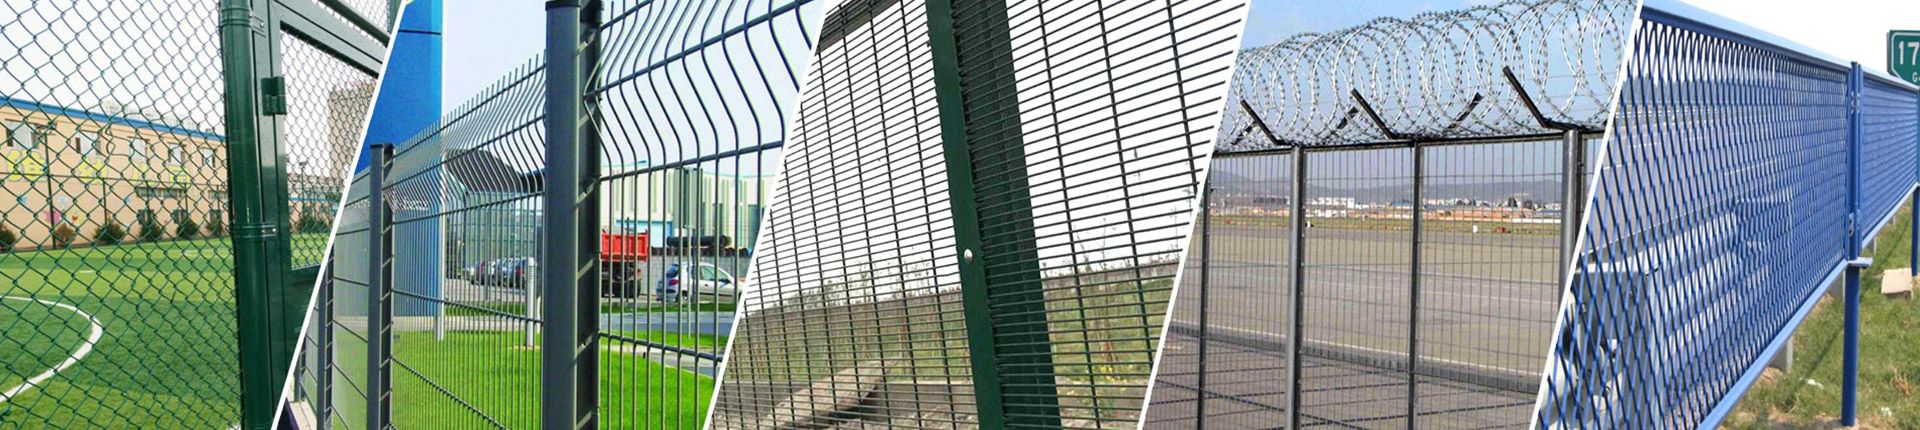 Wire mesh fence applications